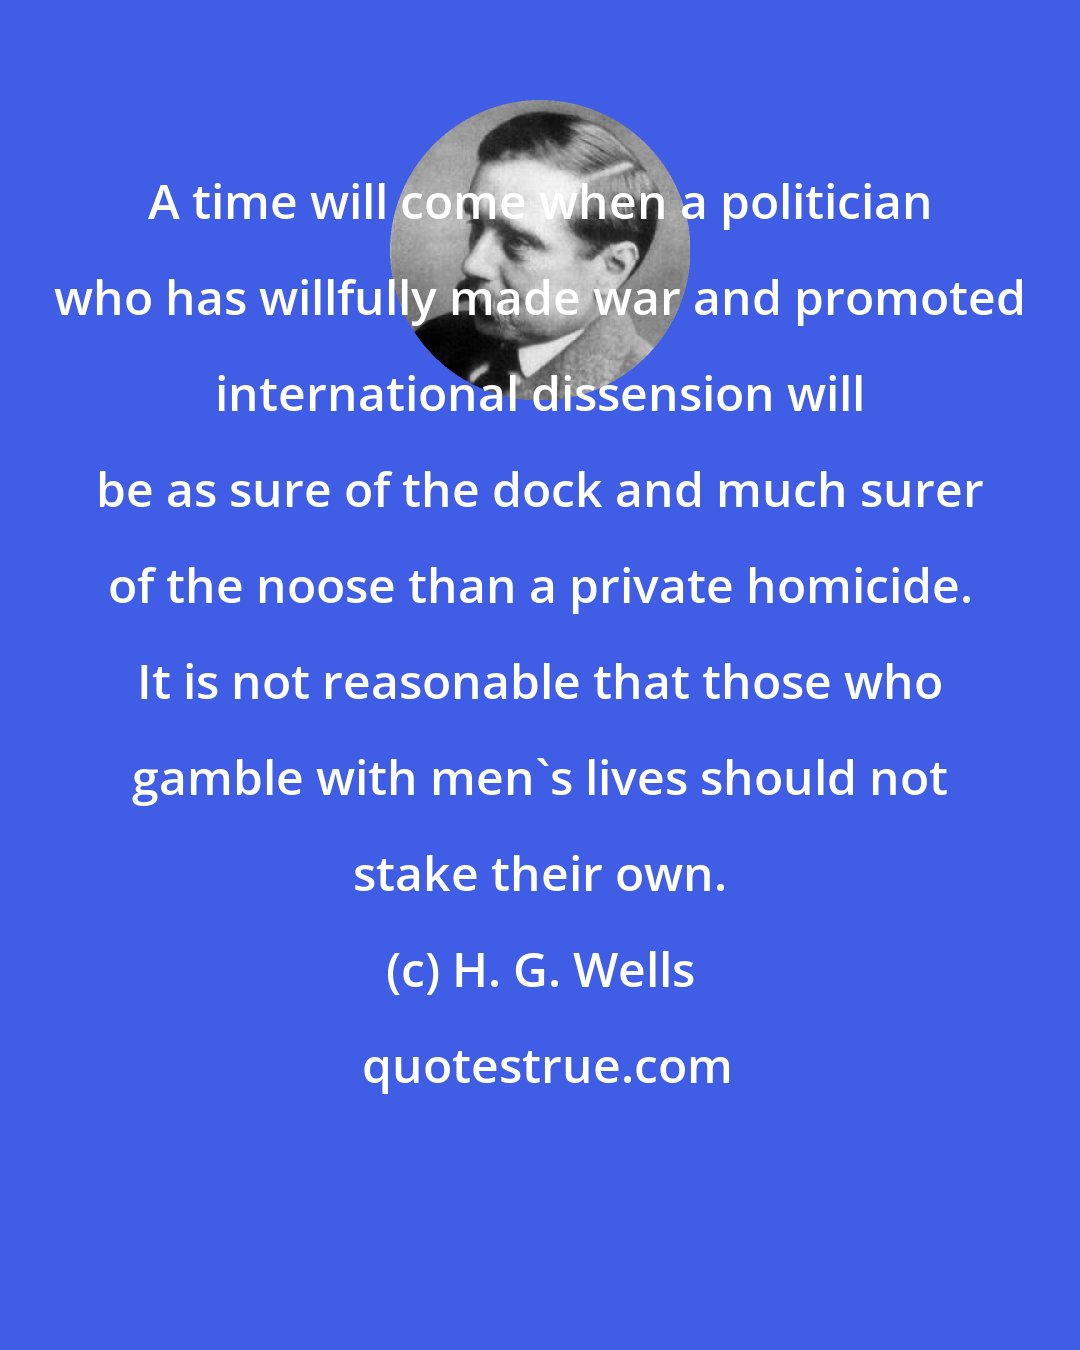 H. G. Wells: A time will come when a politician who has willfully made war and promoted international dissension will be as sure of the dock and much surer of the noose than a private homicide. It is not reasonable that those who gamble with men's lives should not stake their own.